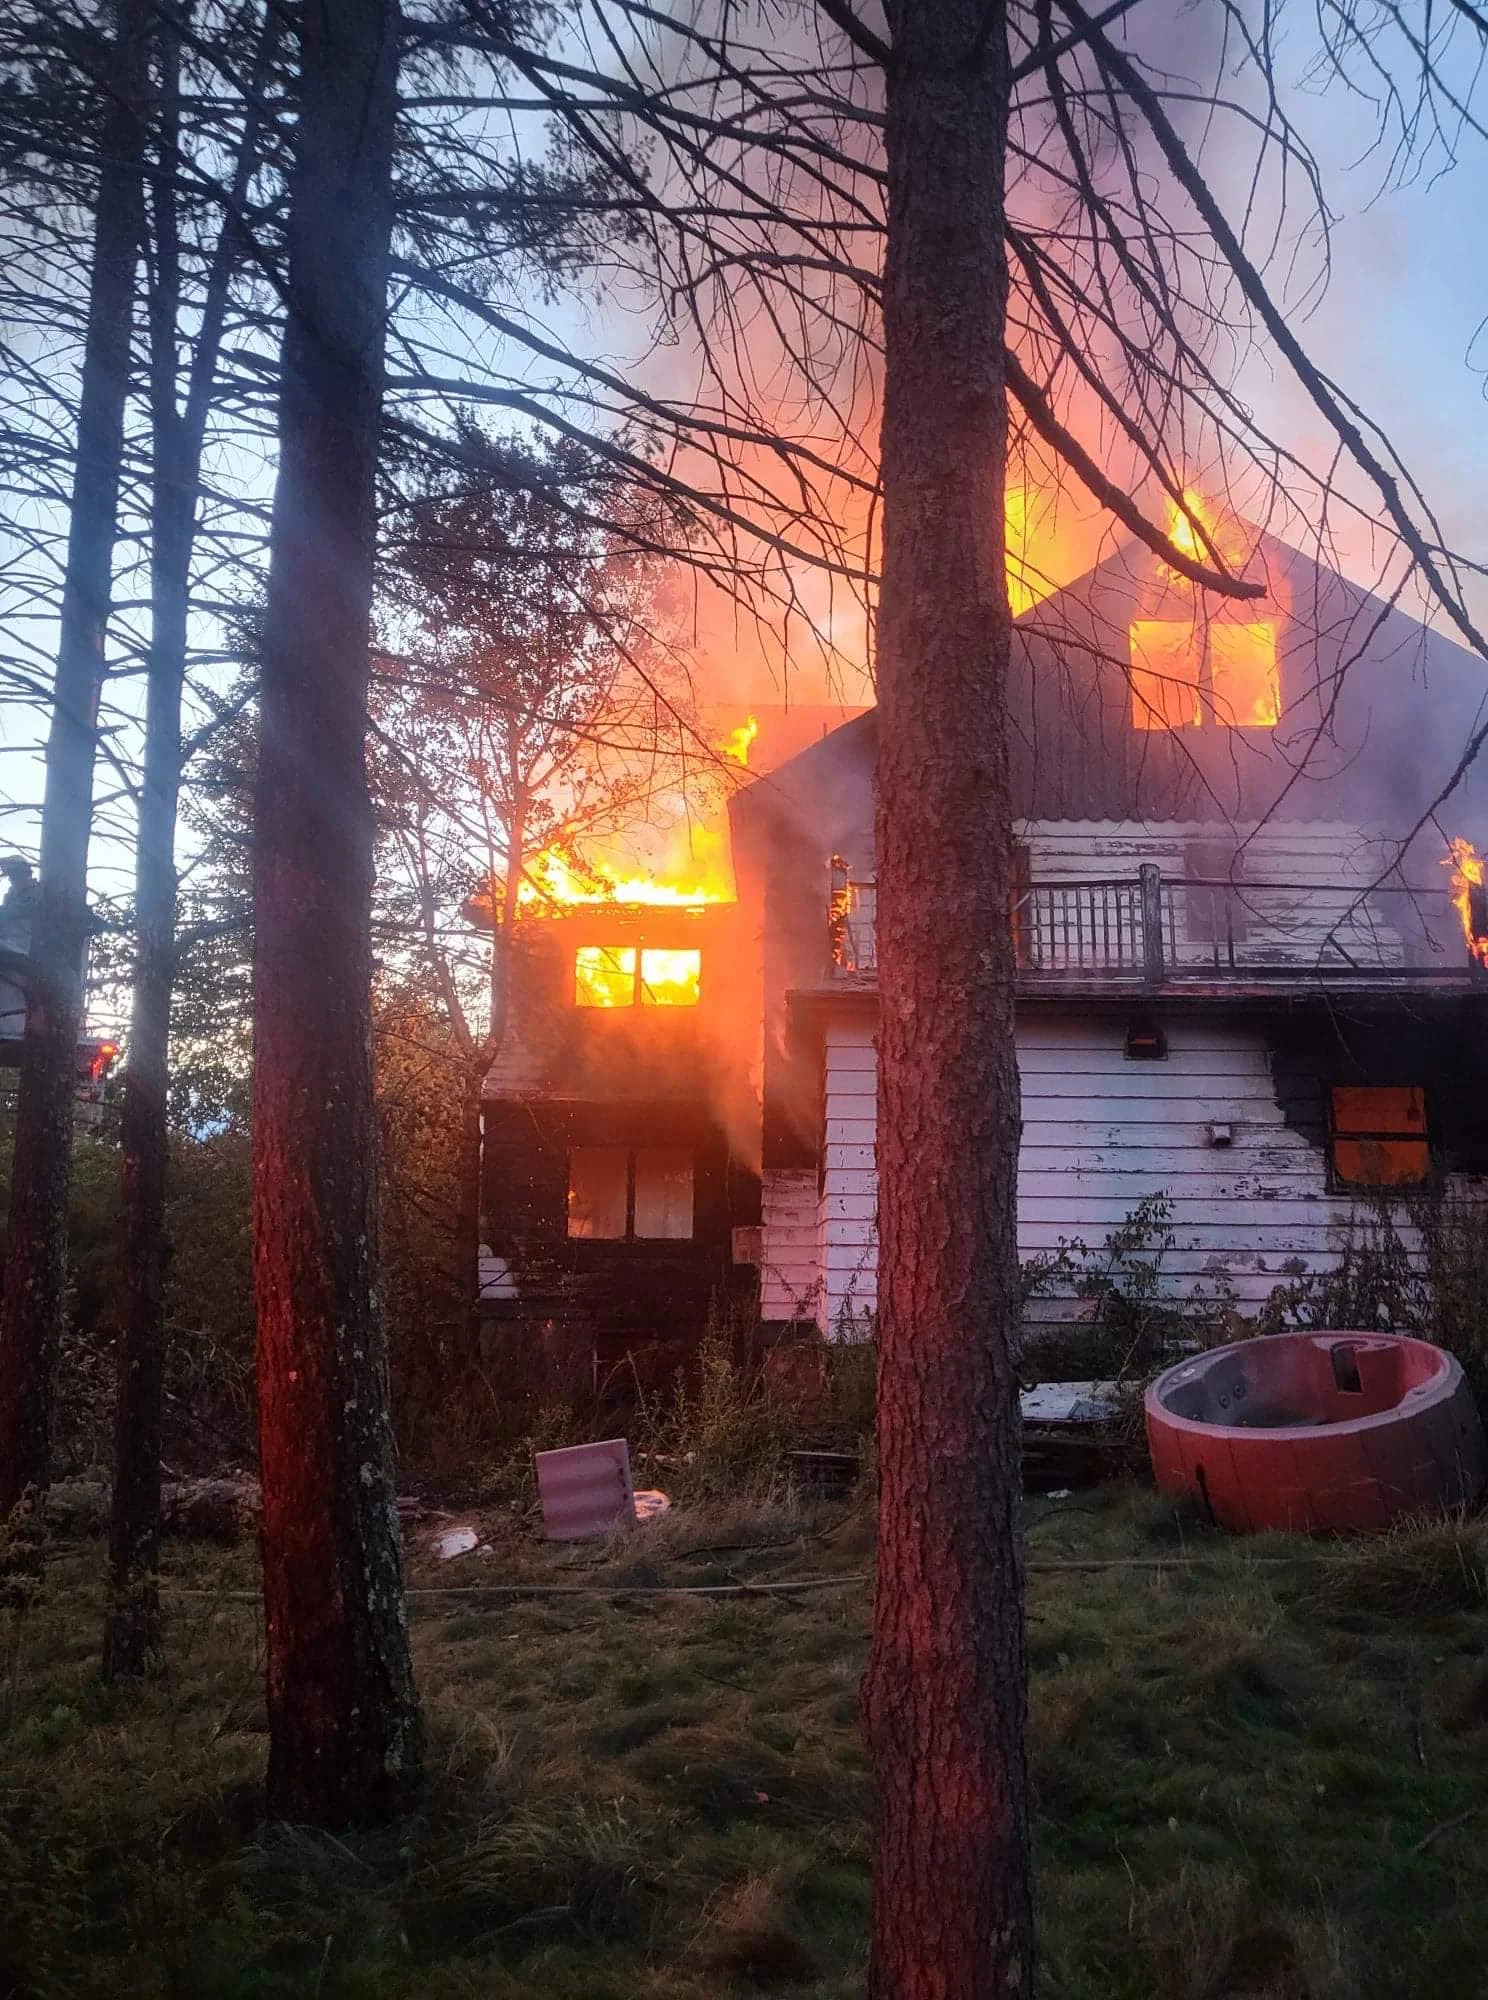 Upstate New York Hotel That Inspired Dirty Dancing Destroyed pic